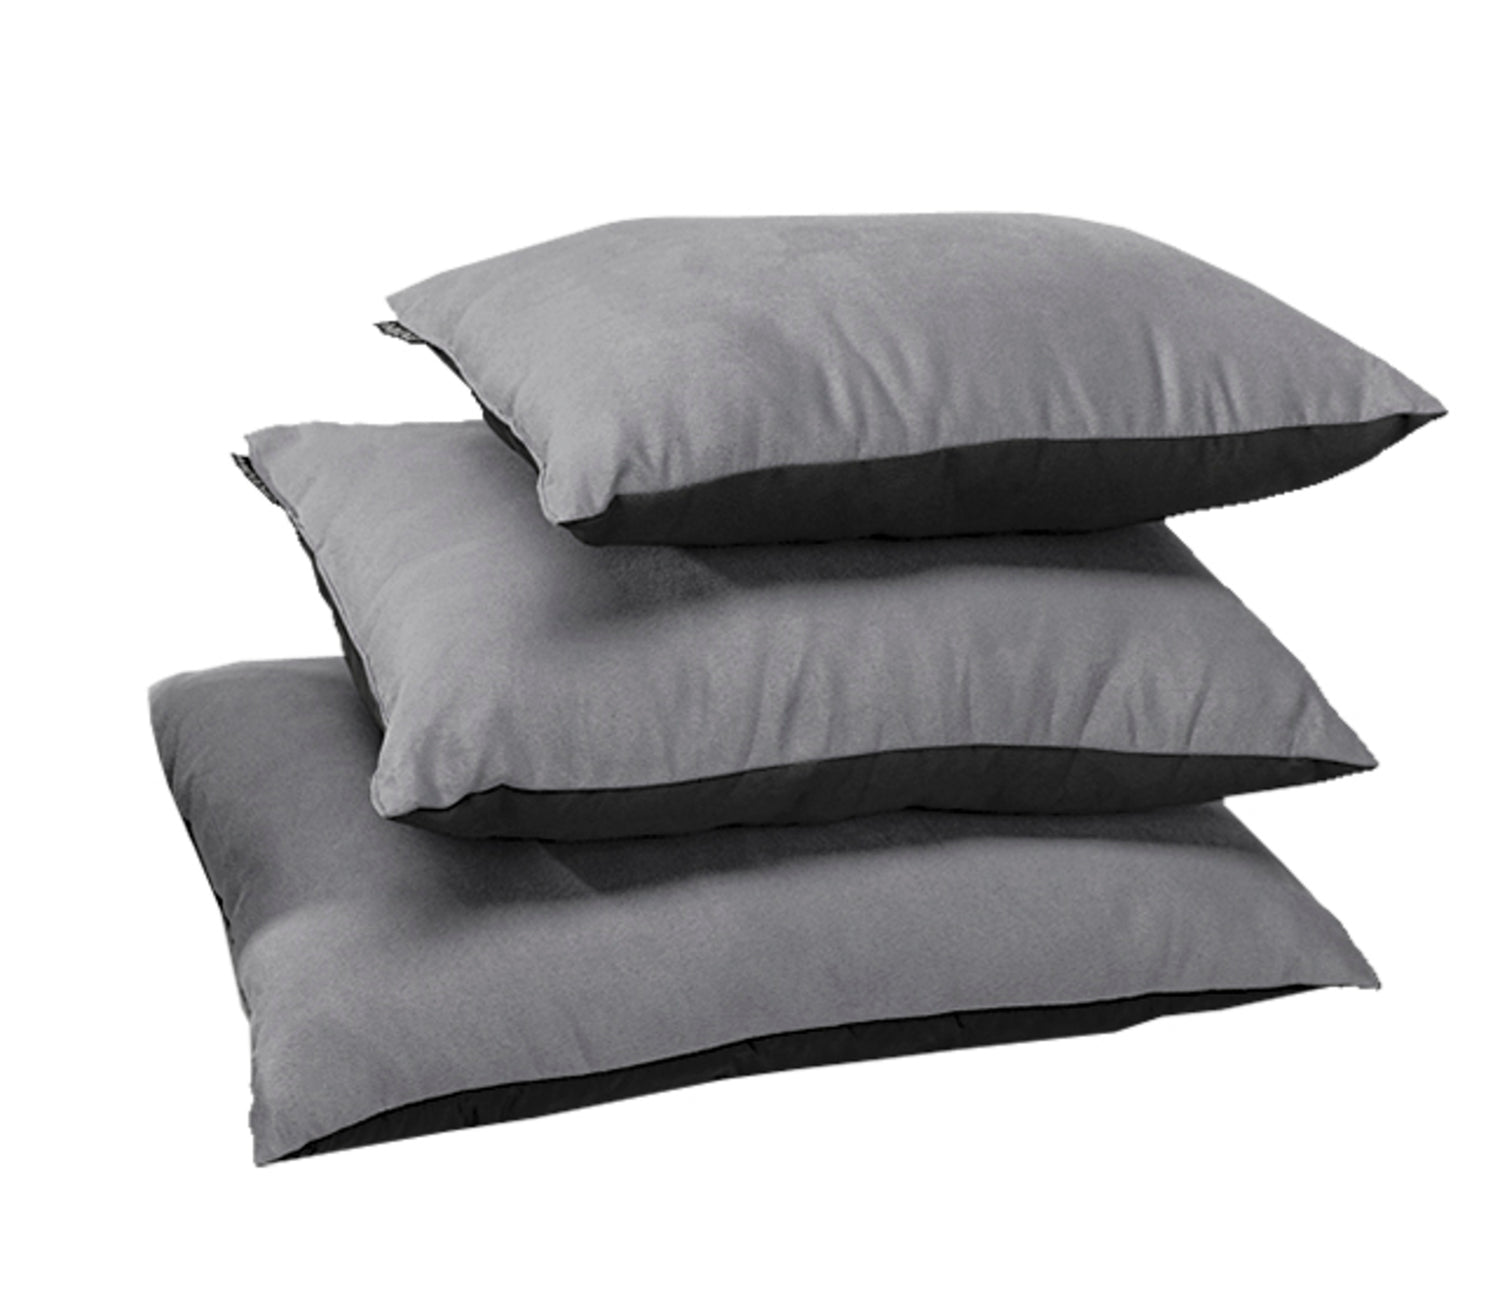 Cocoon Synthetic Pillow M charcoal/smoke grey